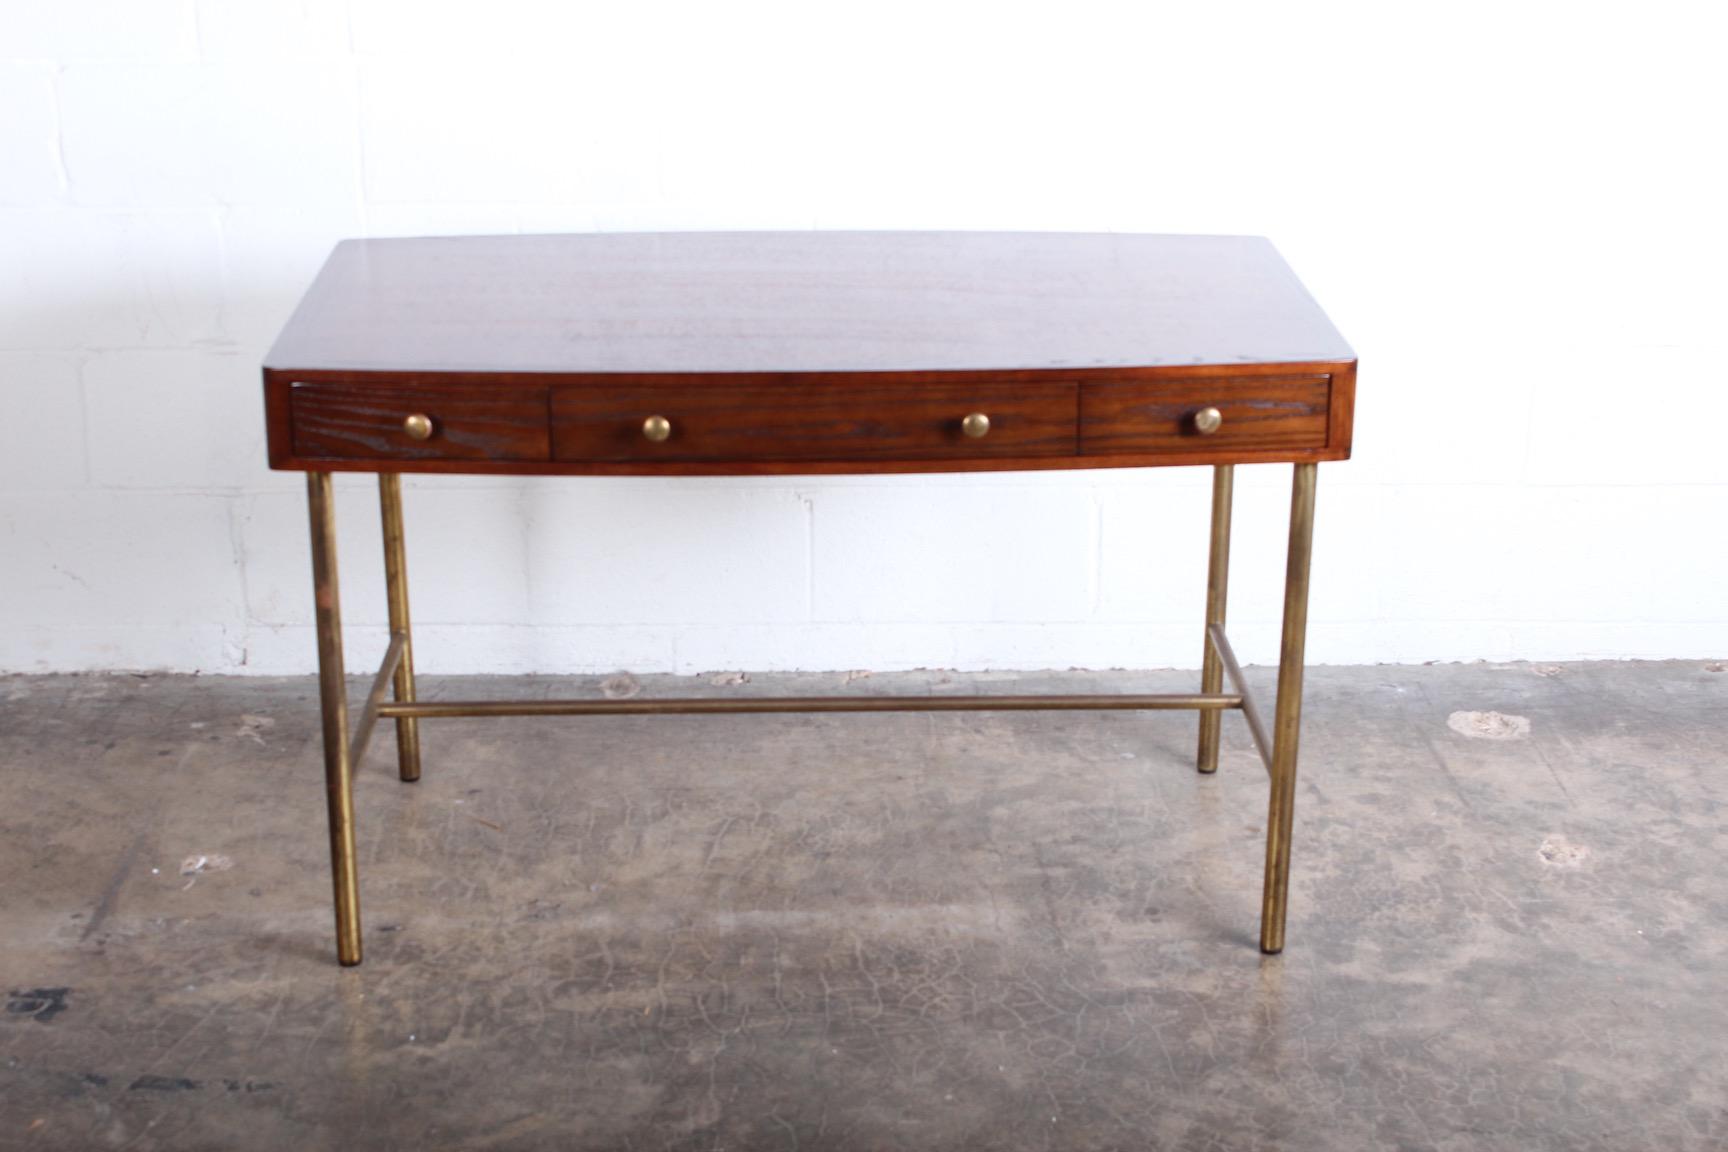 An oak and ash desk with brass base and hardware. Designed by Edward Wormley for Dunbar.